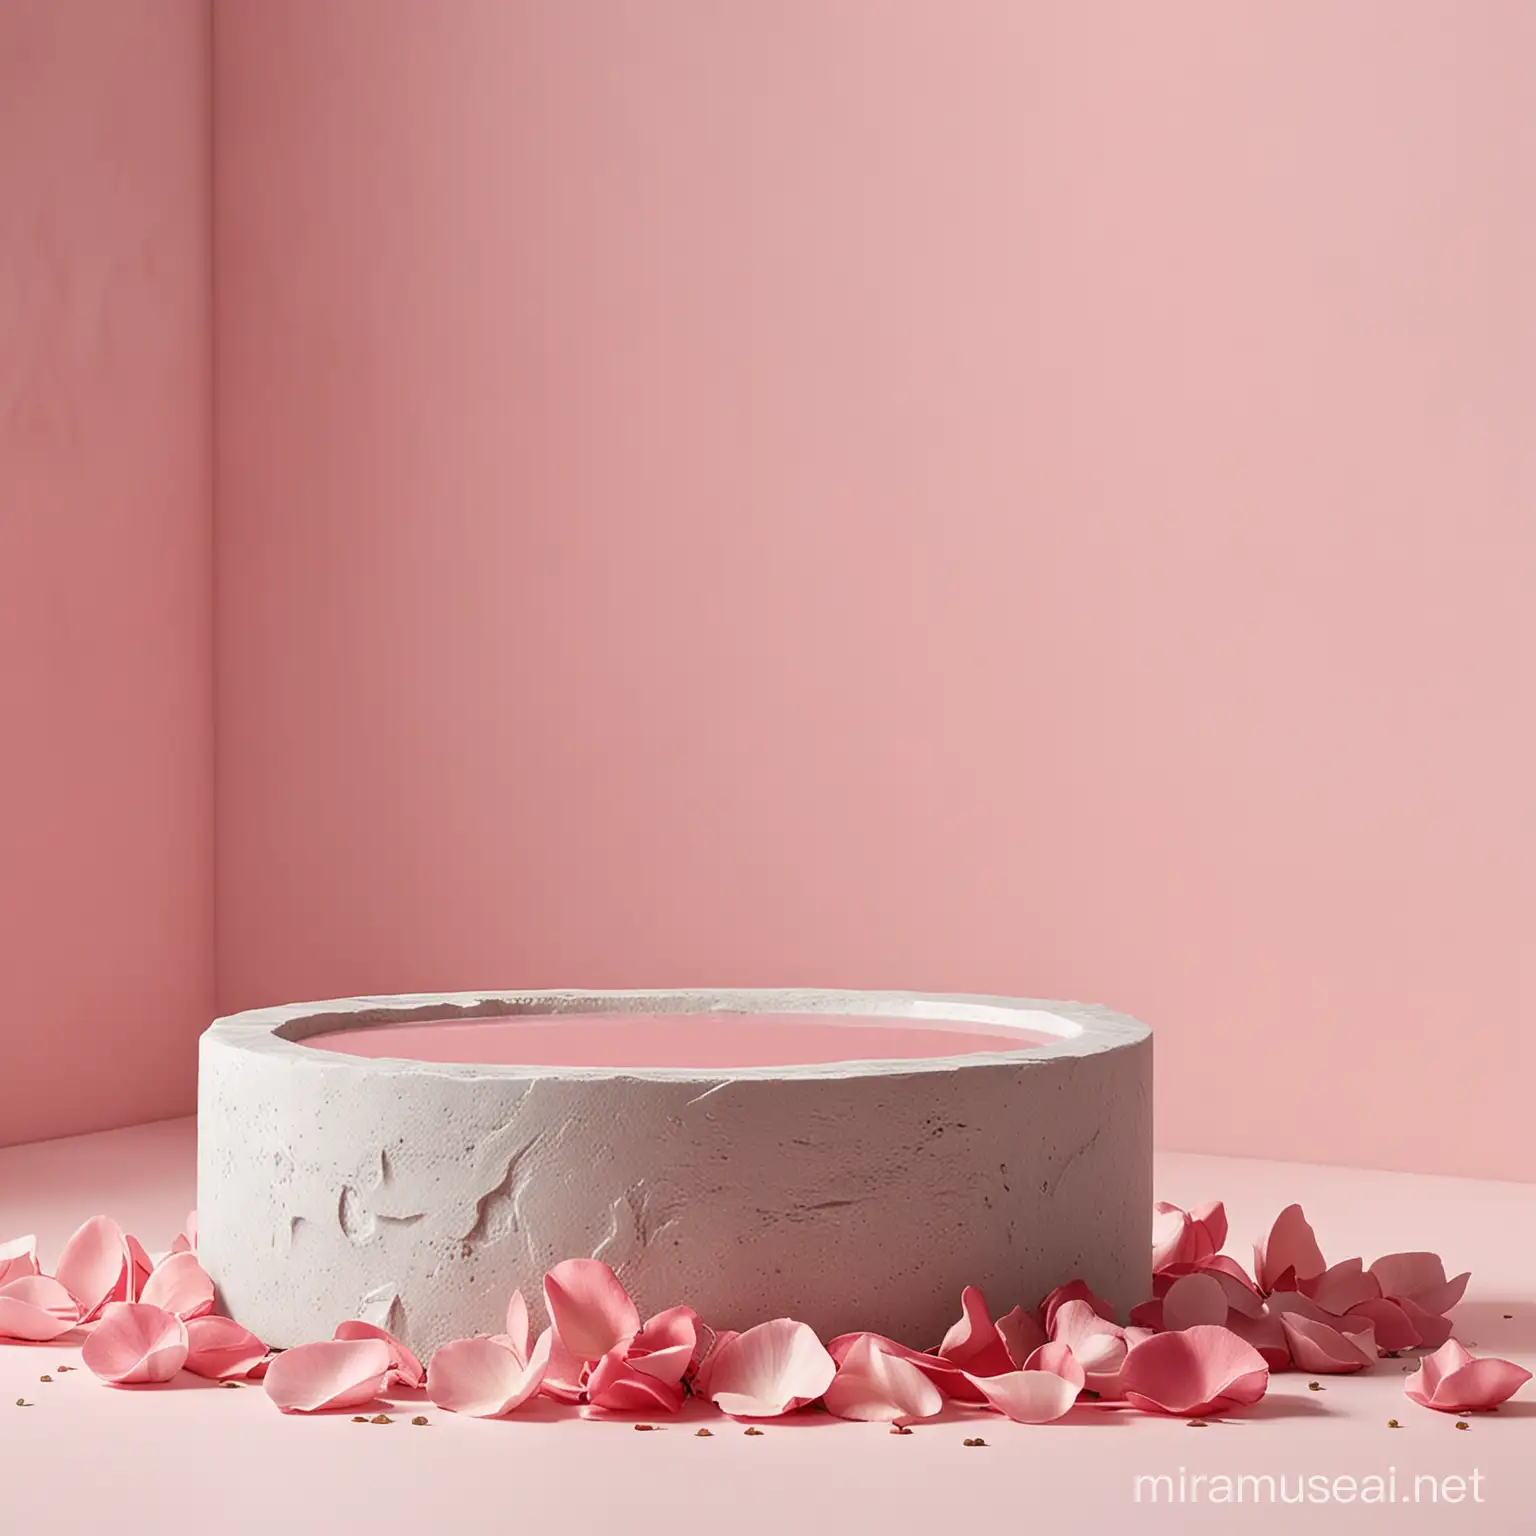 Realistic Cosmetic Product Shoot with Stone Base and Rose Petals